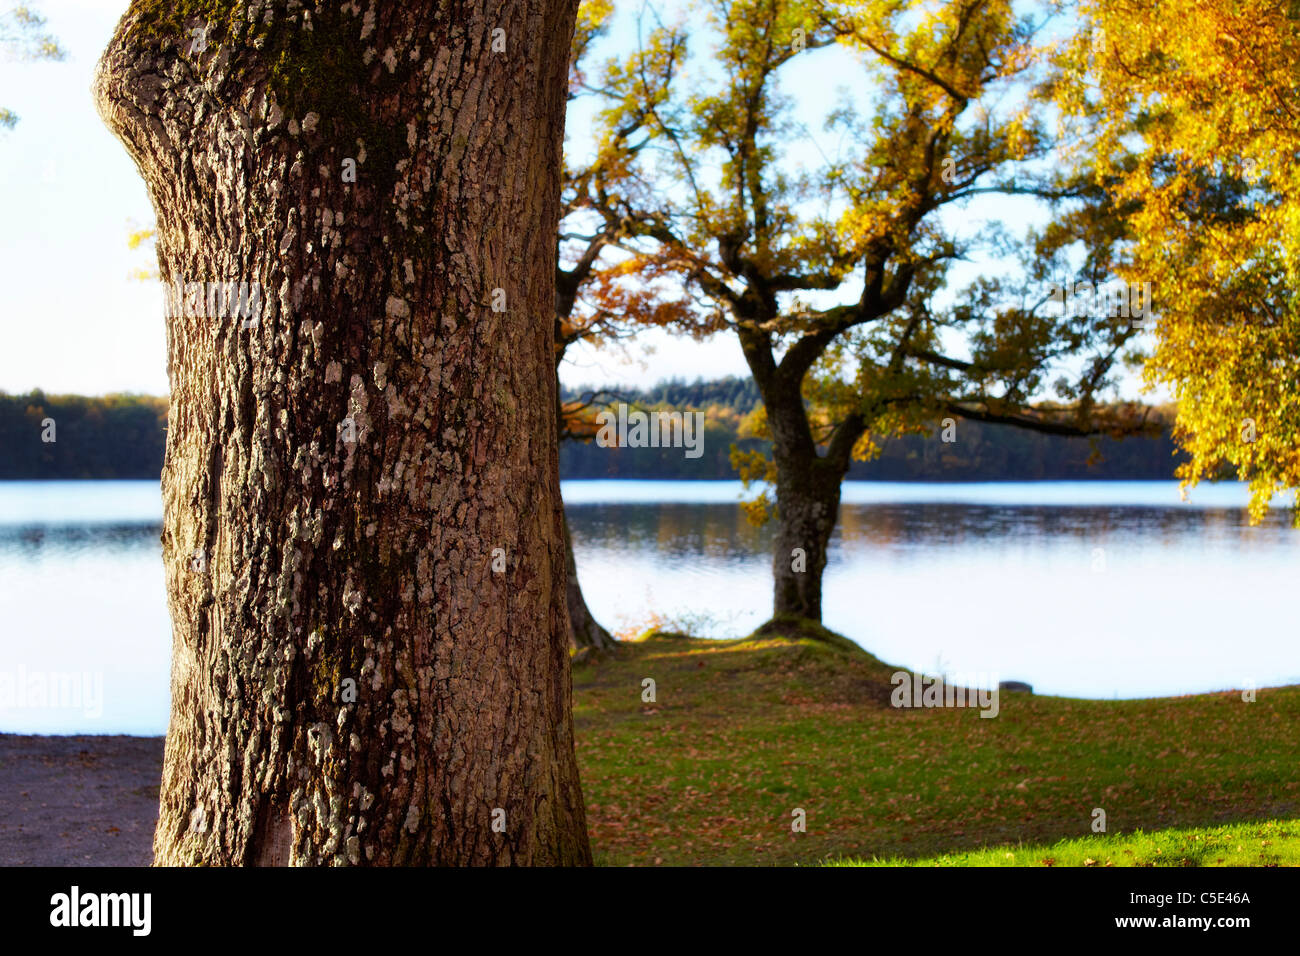 Close-up of a tree trunk with autumnal trees by the peaceful lake Stock Photo